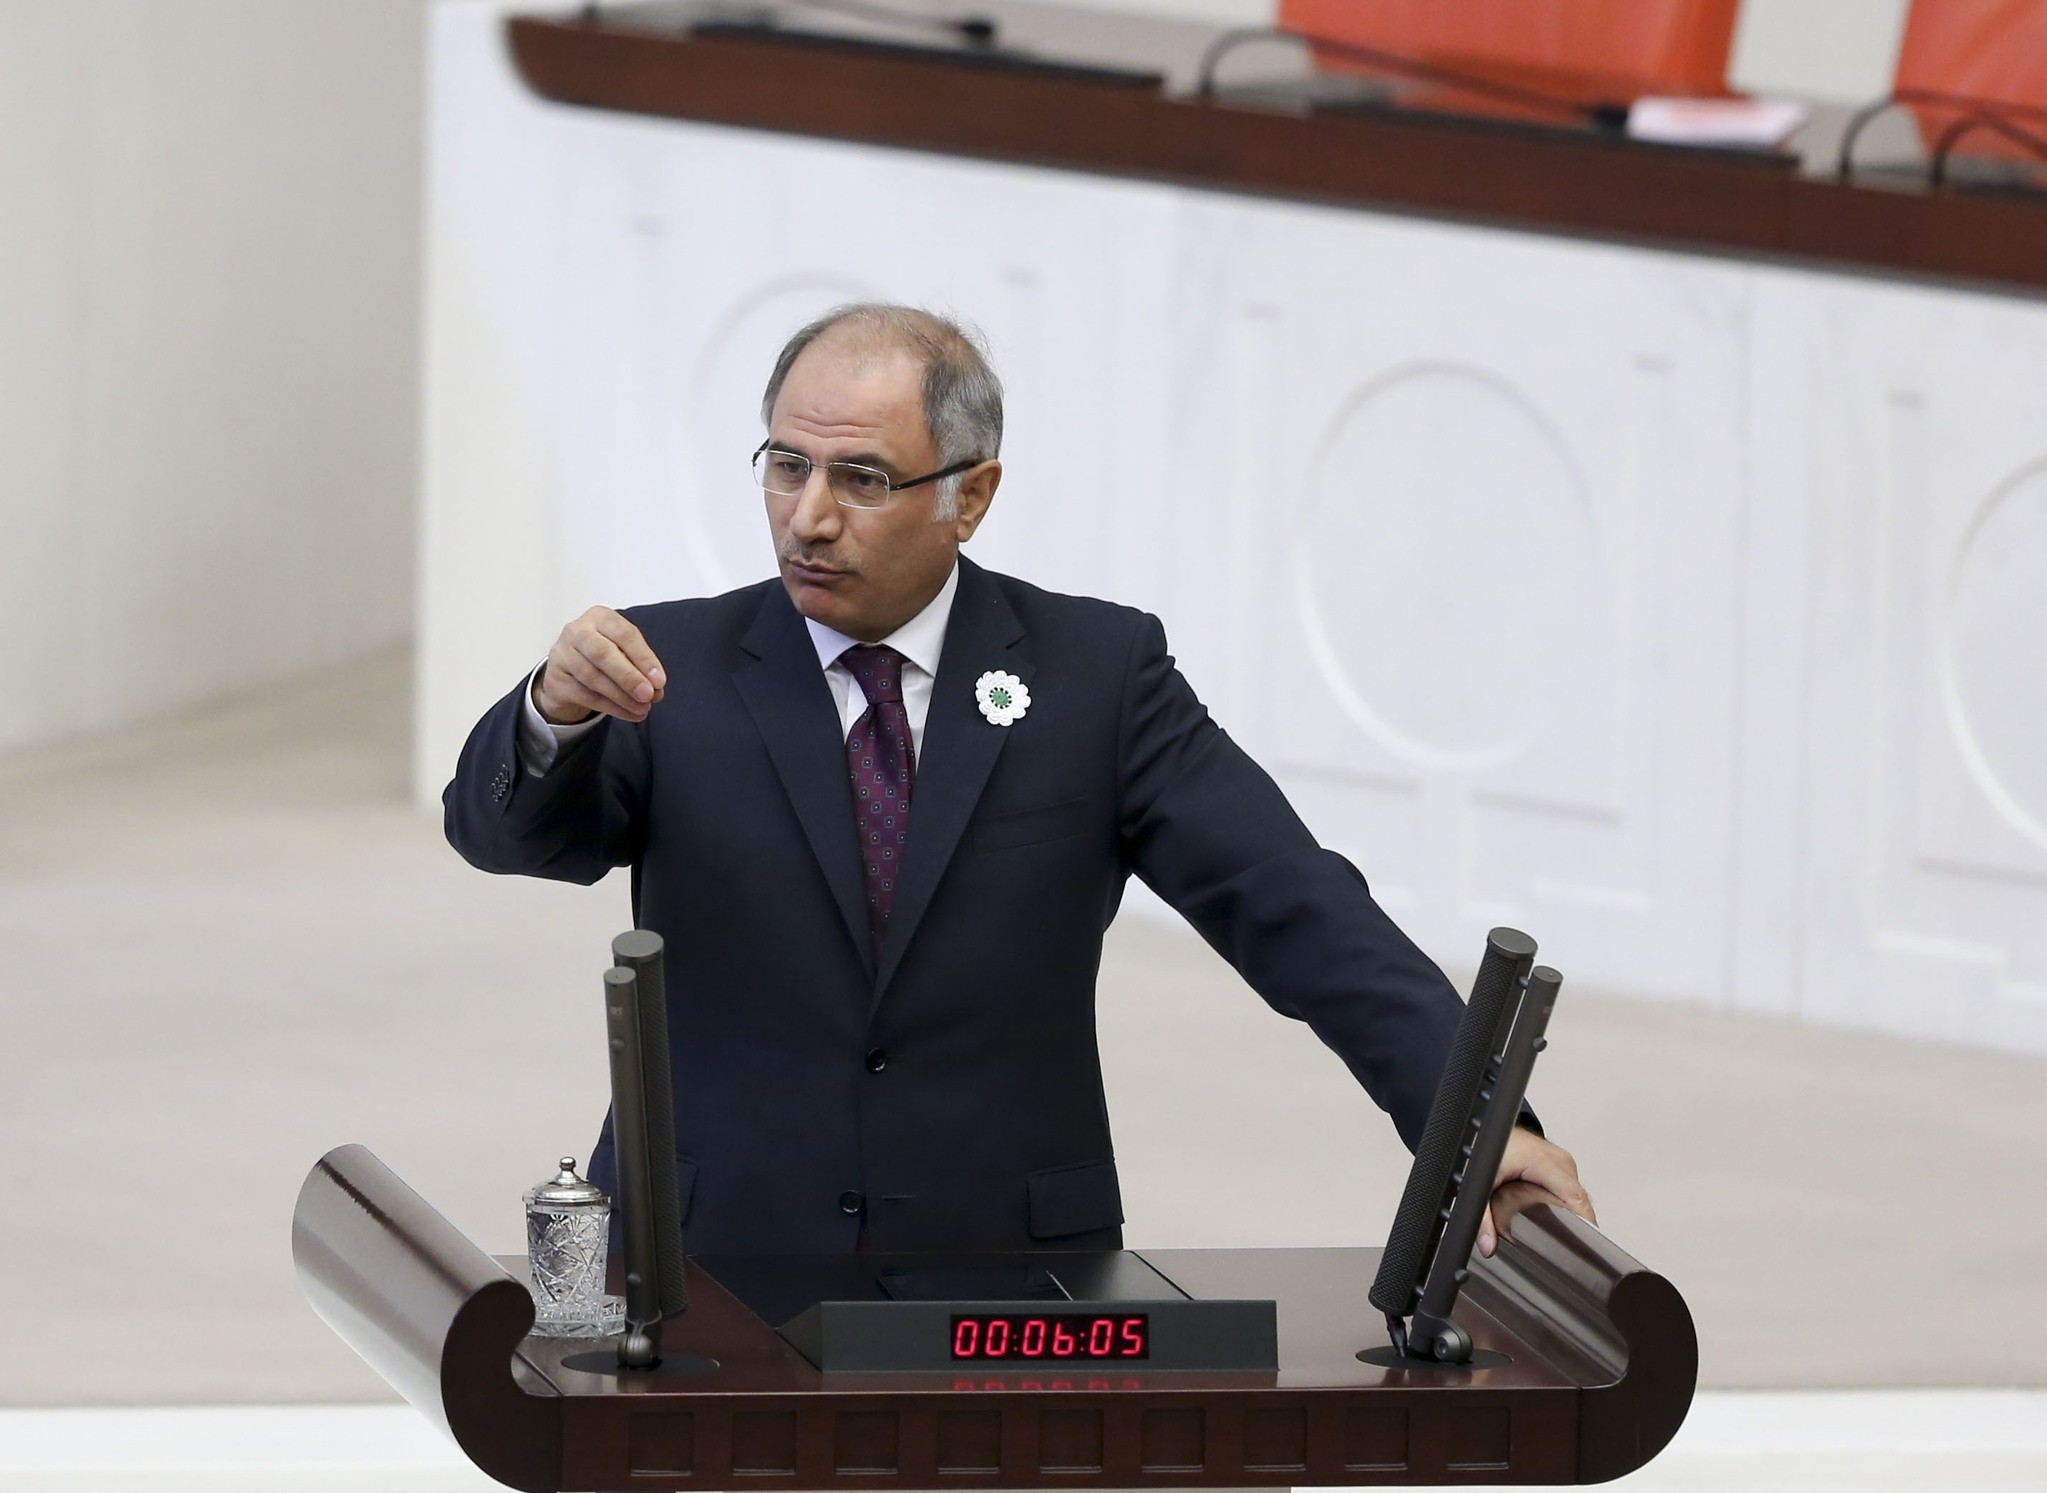 Interior Minister Efkan Ala delivering a speech in the TGNA in Ankara on July 12, 2016. (AA Photo)